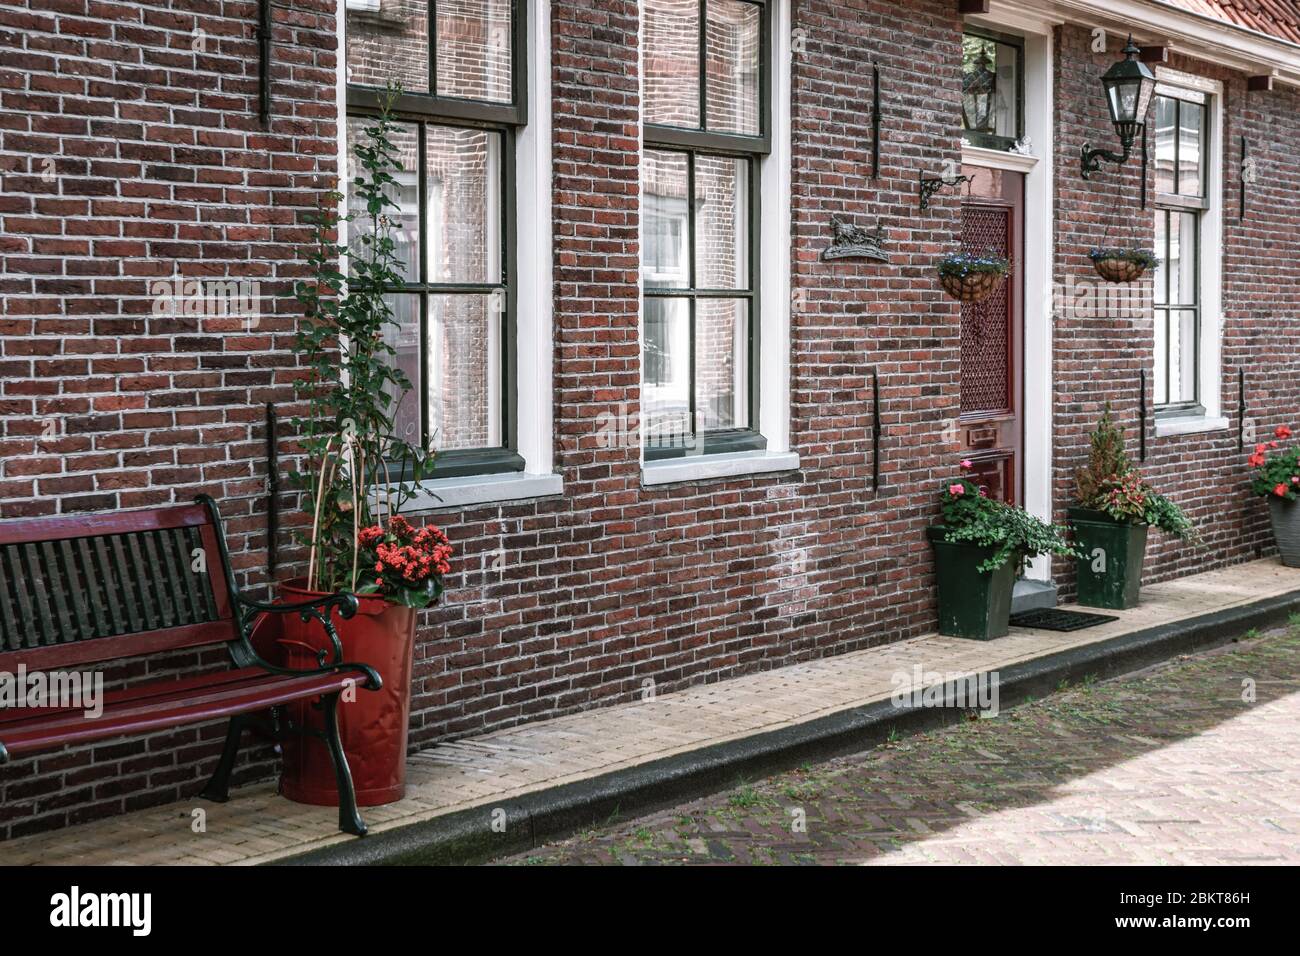 Edam, Netherlands, September 22, 2019:  The decorated facade of a house in Edam in the Netherlands Stock Photo